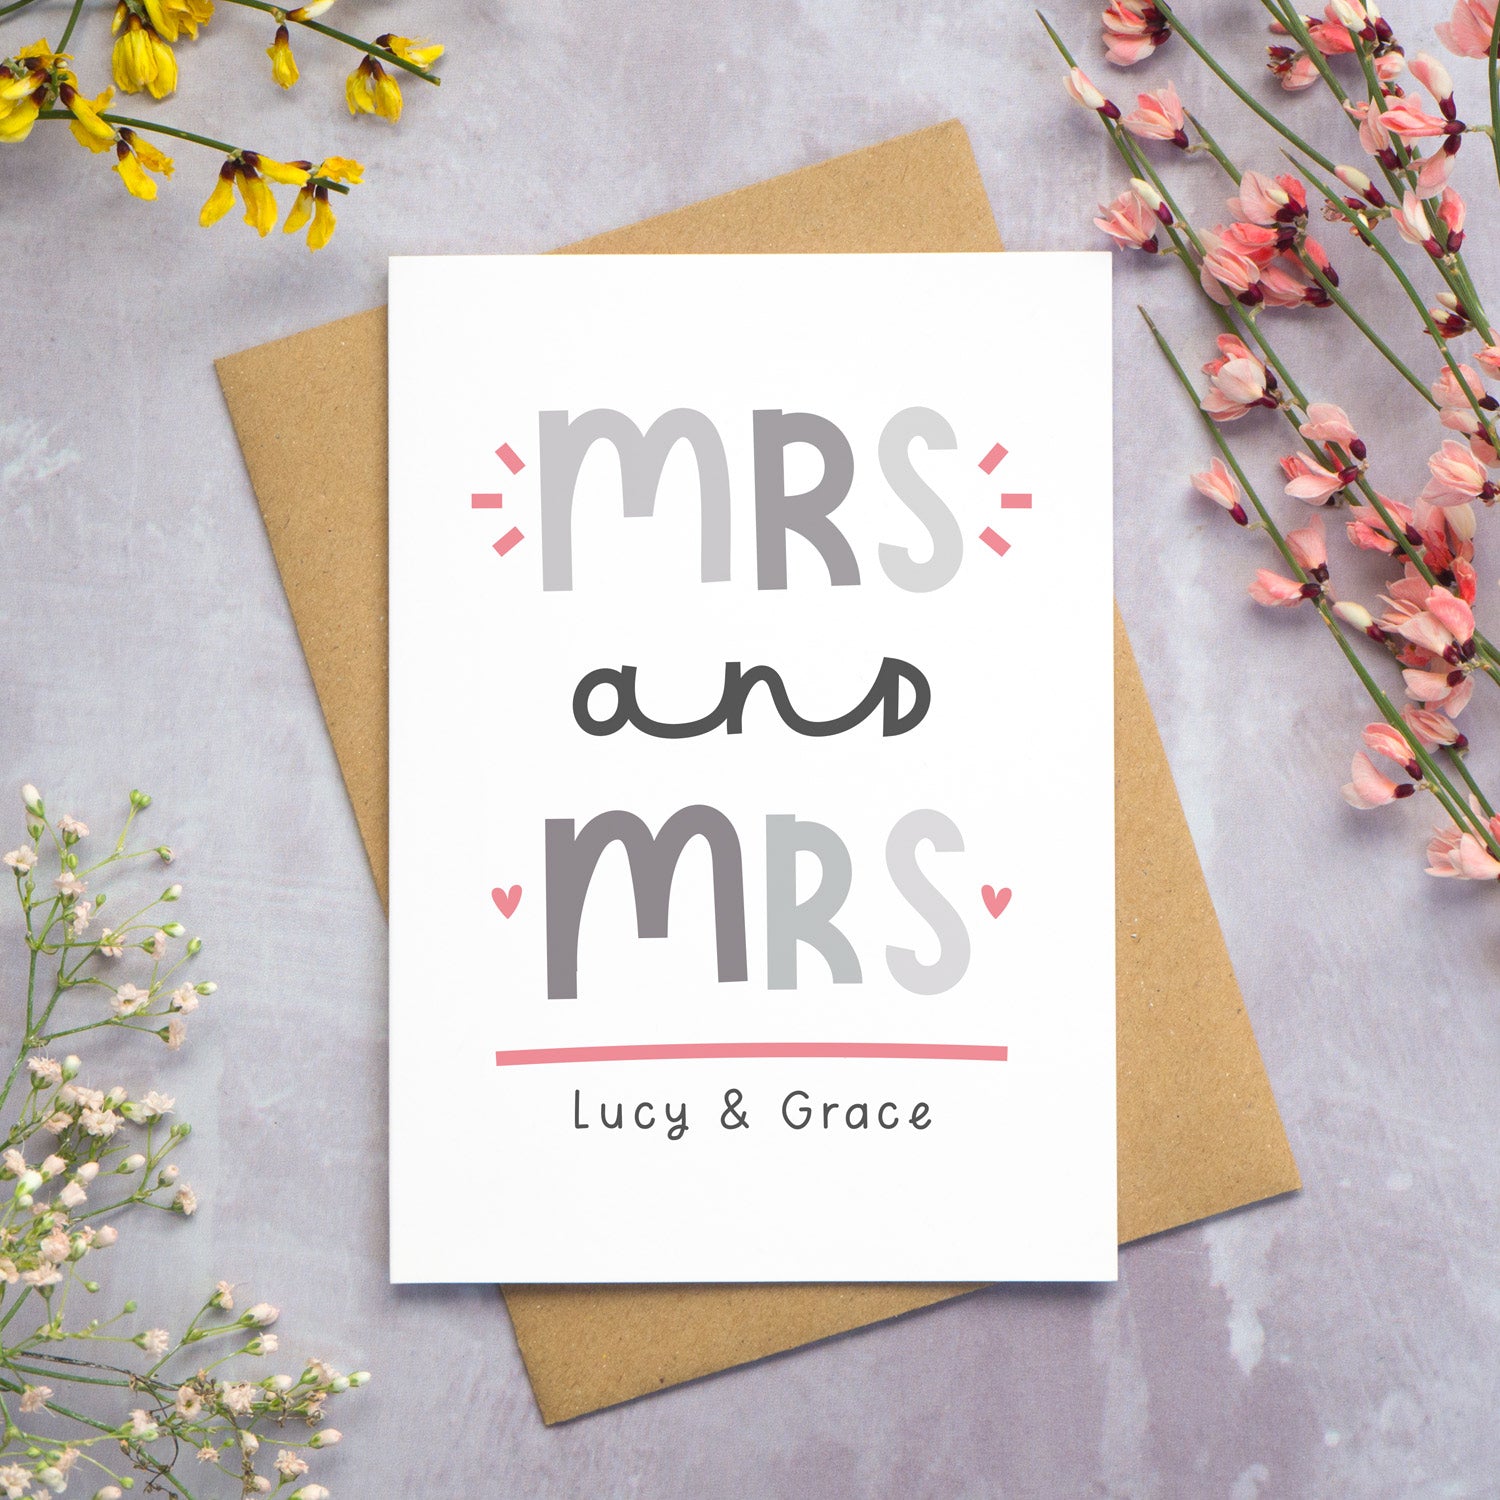 A Mrs and Mrs personalised wedding congratulations card lying flat on top of a kraft brown envelope on a grey background with yellow, pink and white foliage coming in from the sides. This is the grey and pink version of the card.